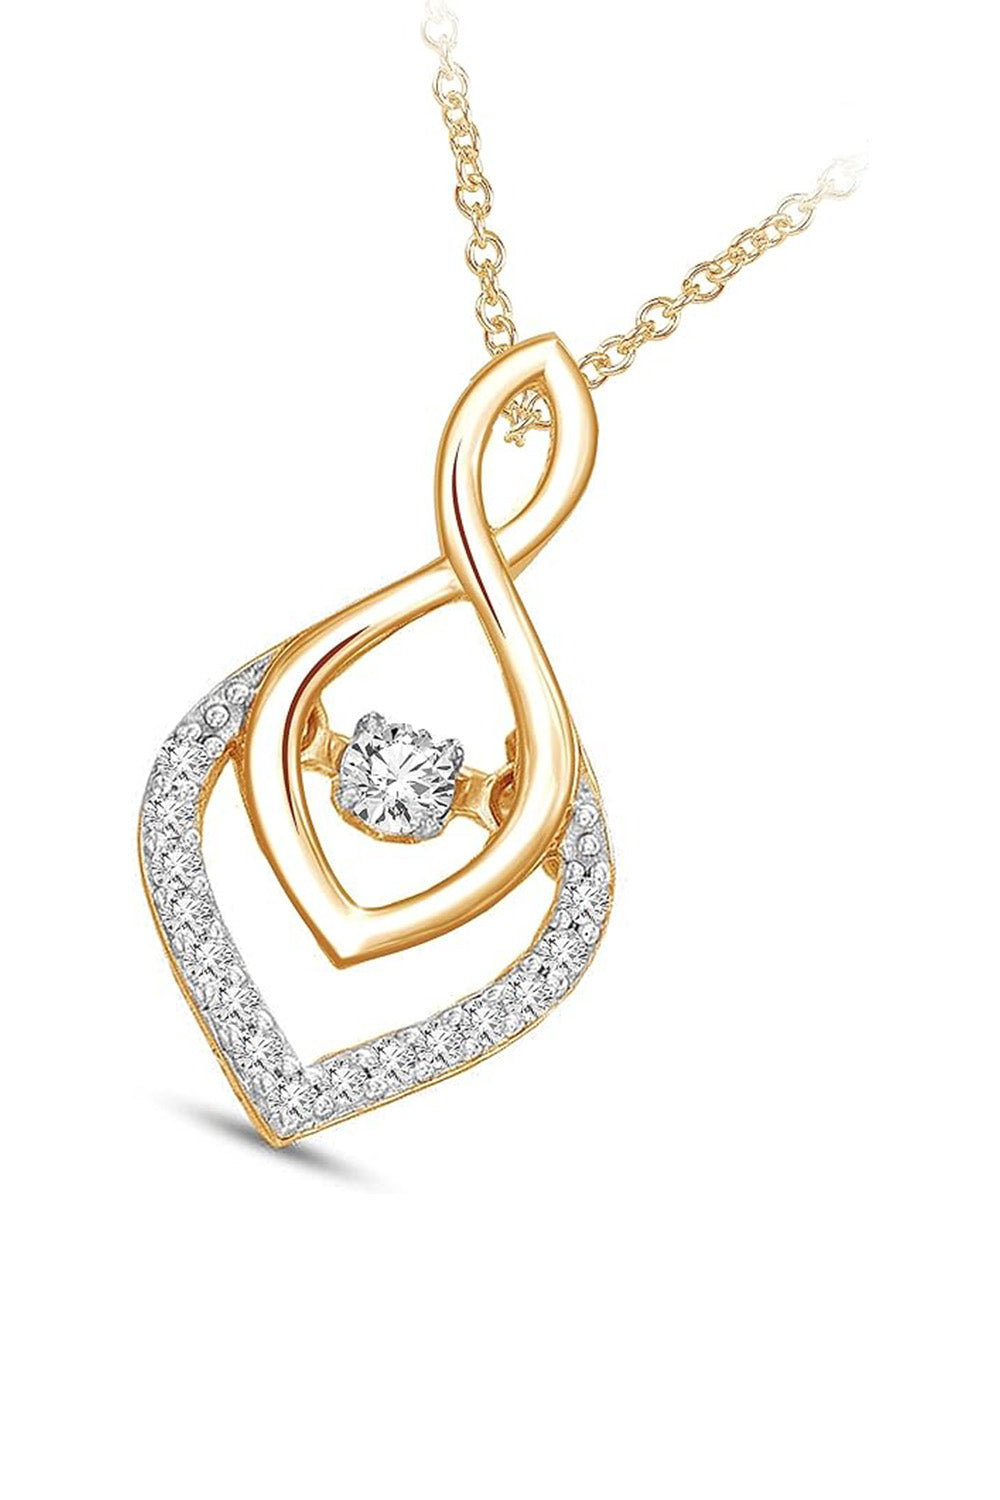 Yellow Gold Color Infinity Flame Pendant Necklace, Pendant For Women